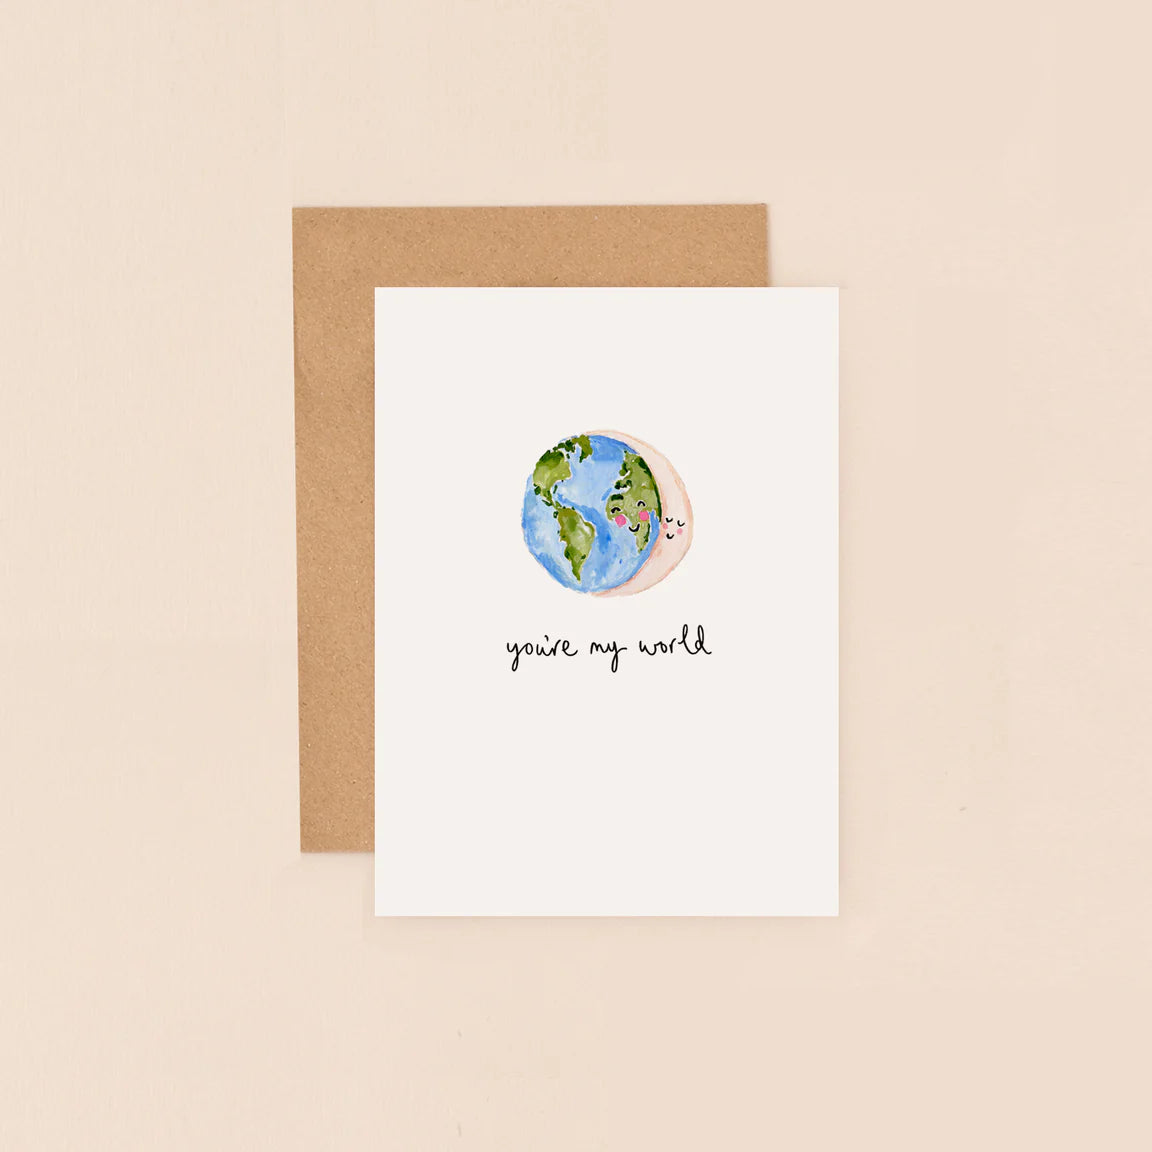 Fabulous Greeting Cards Louise Mulgrew Mini Card You'Re My World Card by Weirs of Baggot Street